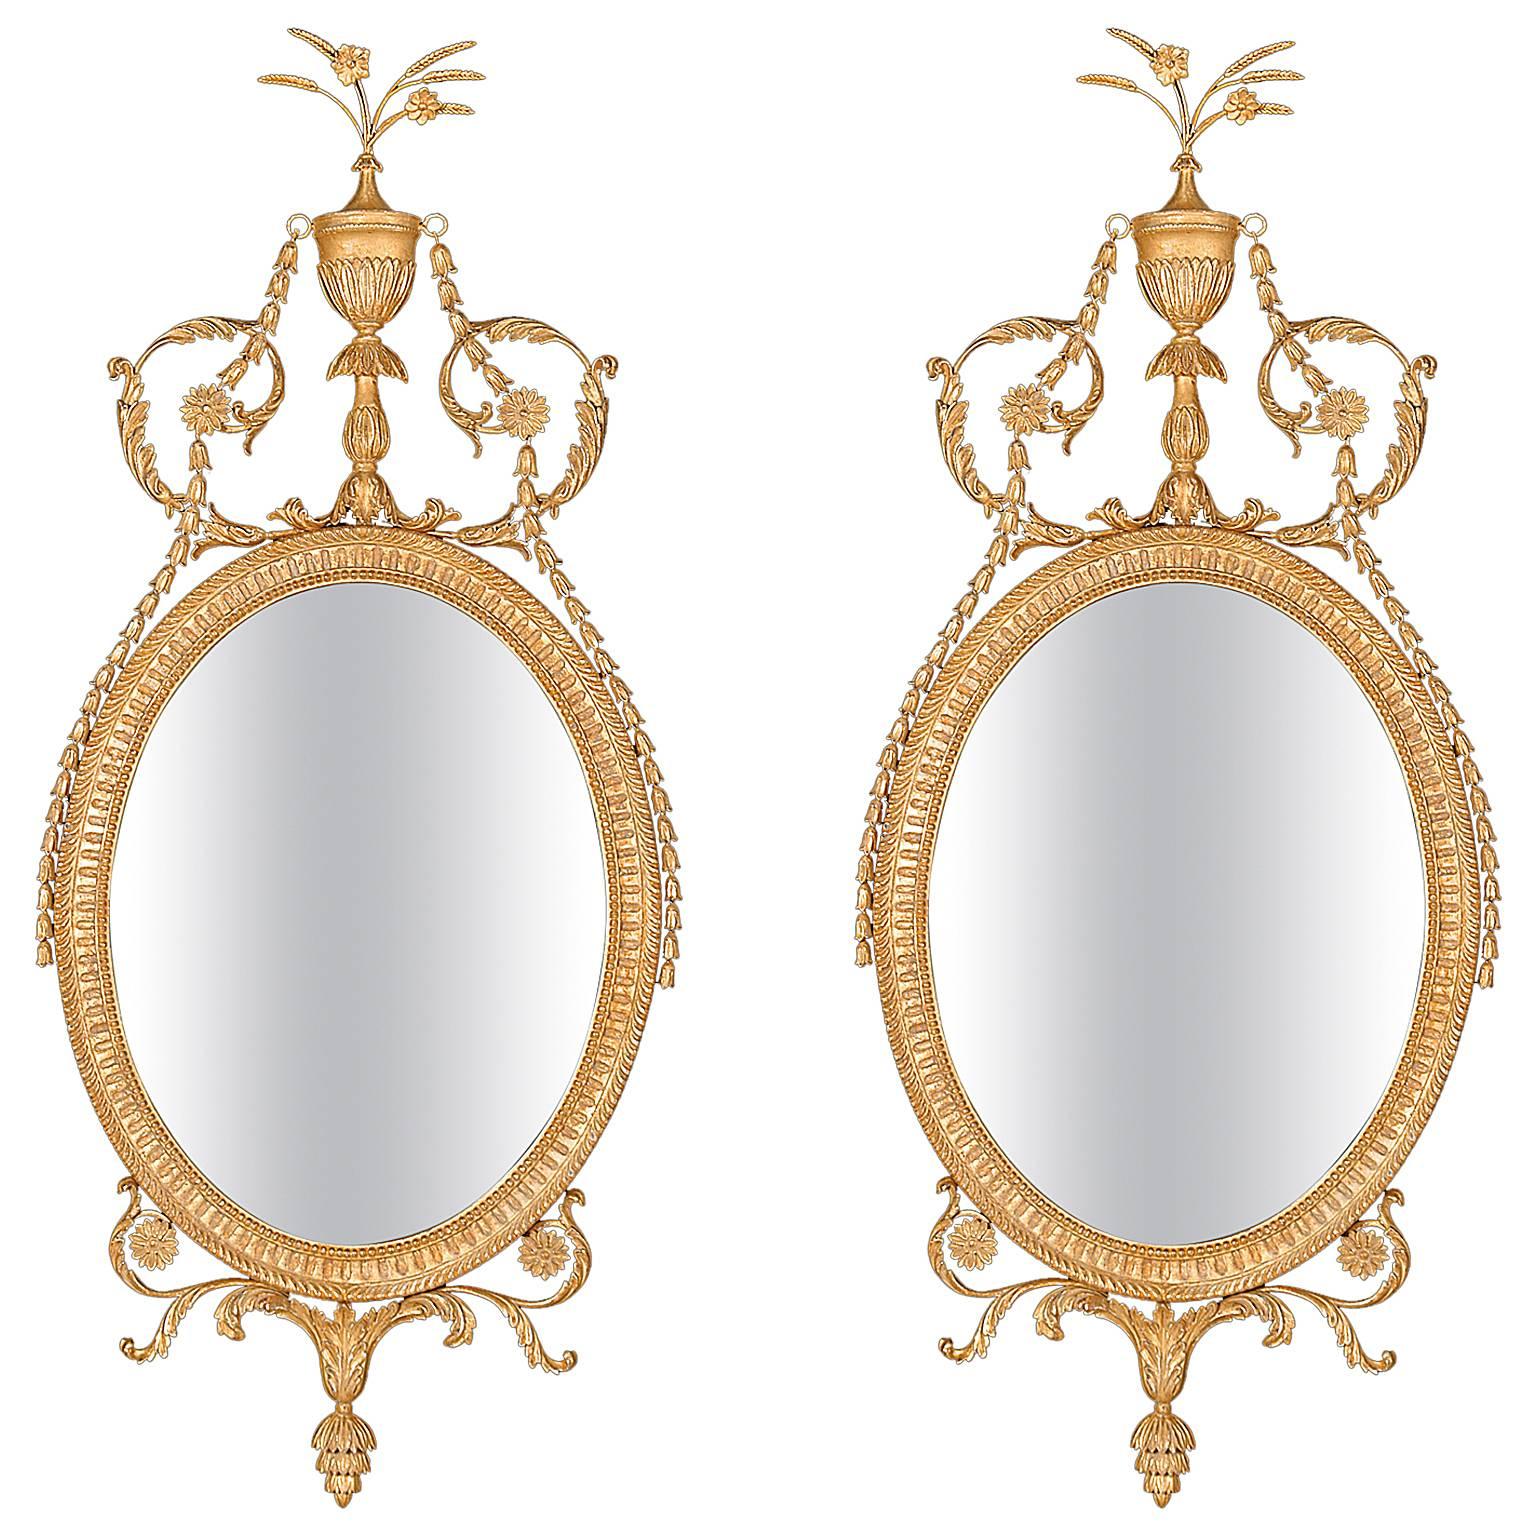 Pair of Oval Mirrors in the manner of Robert Adam